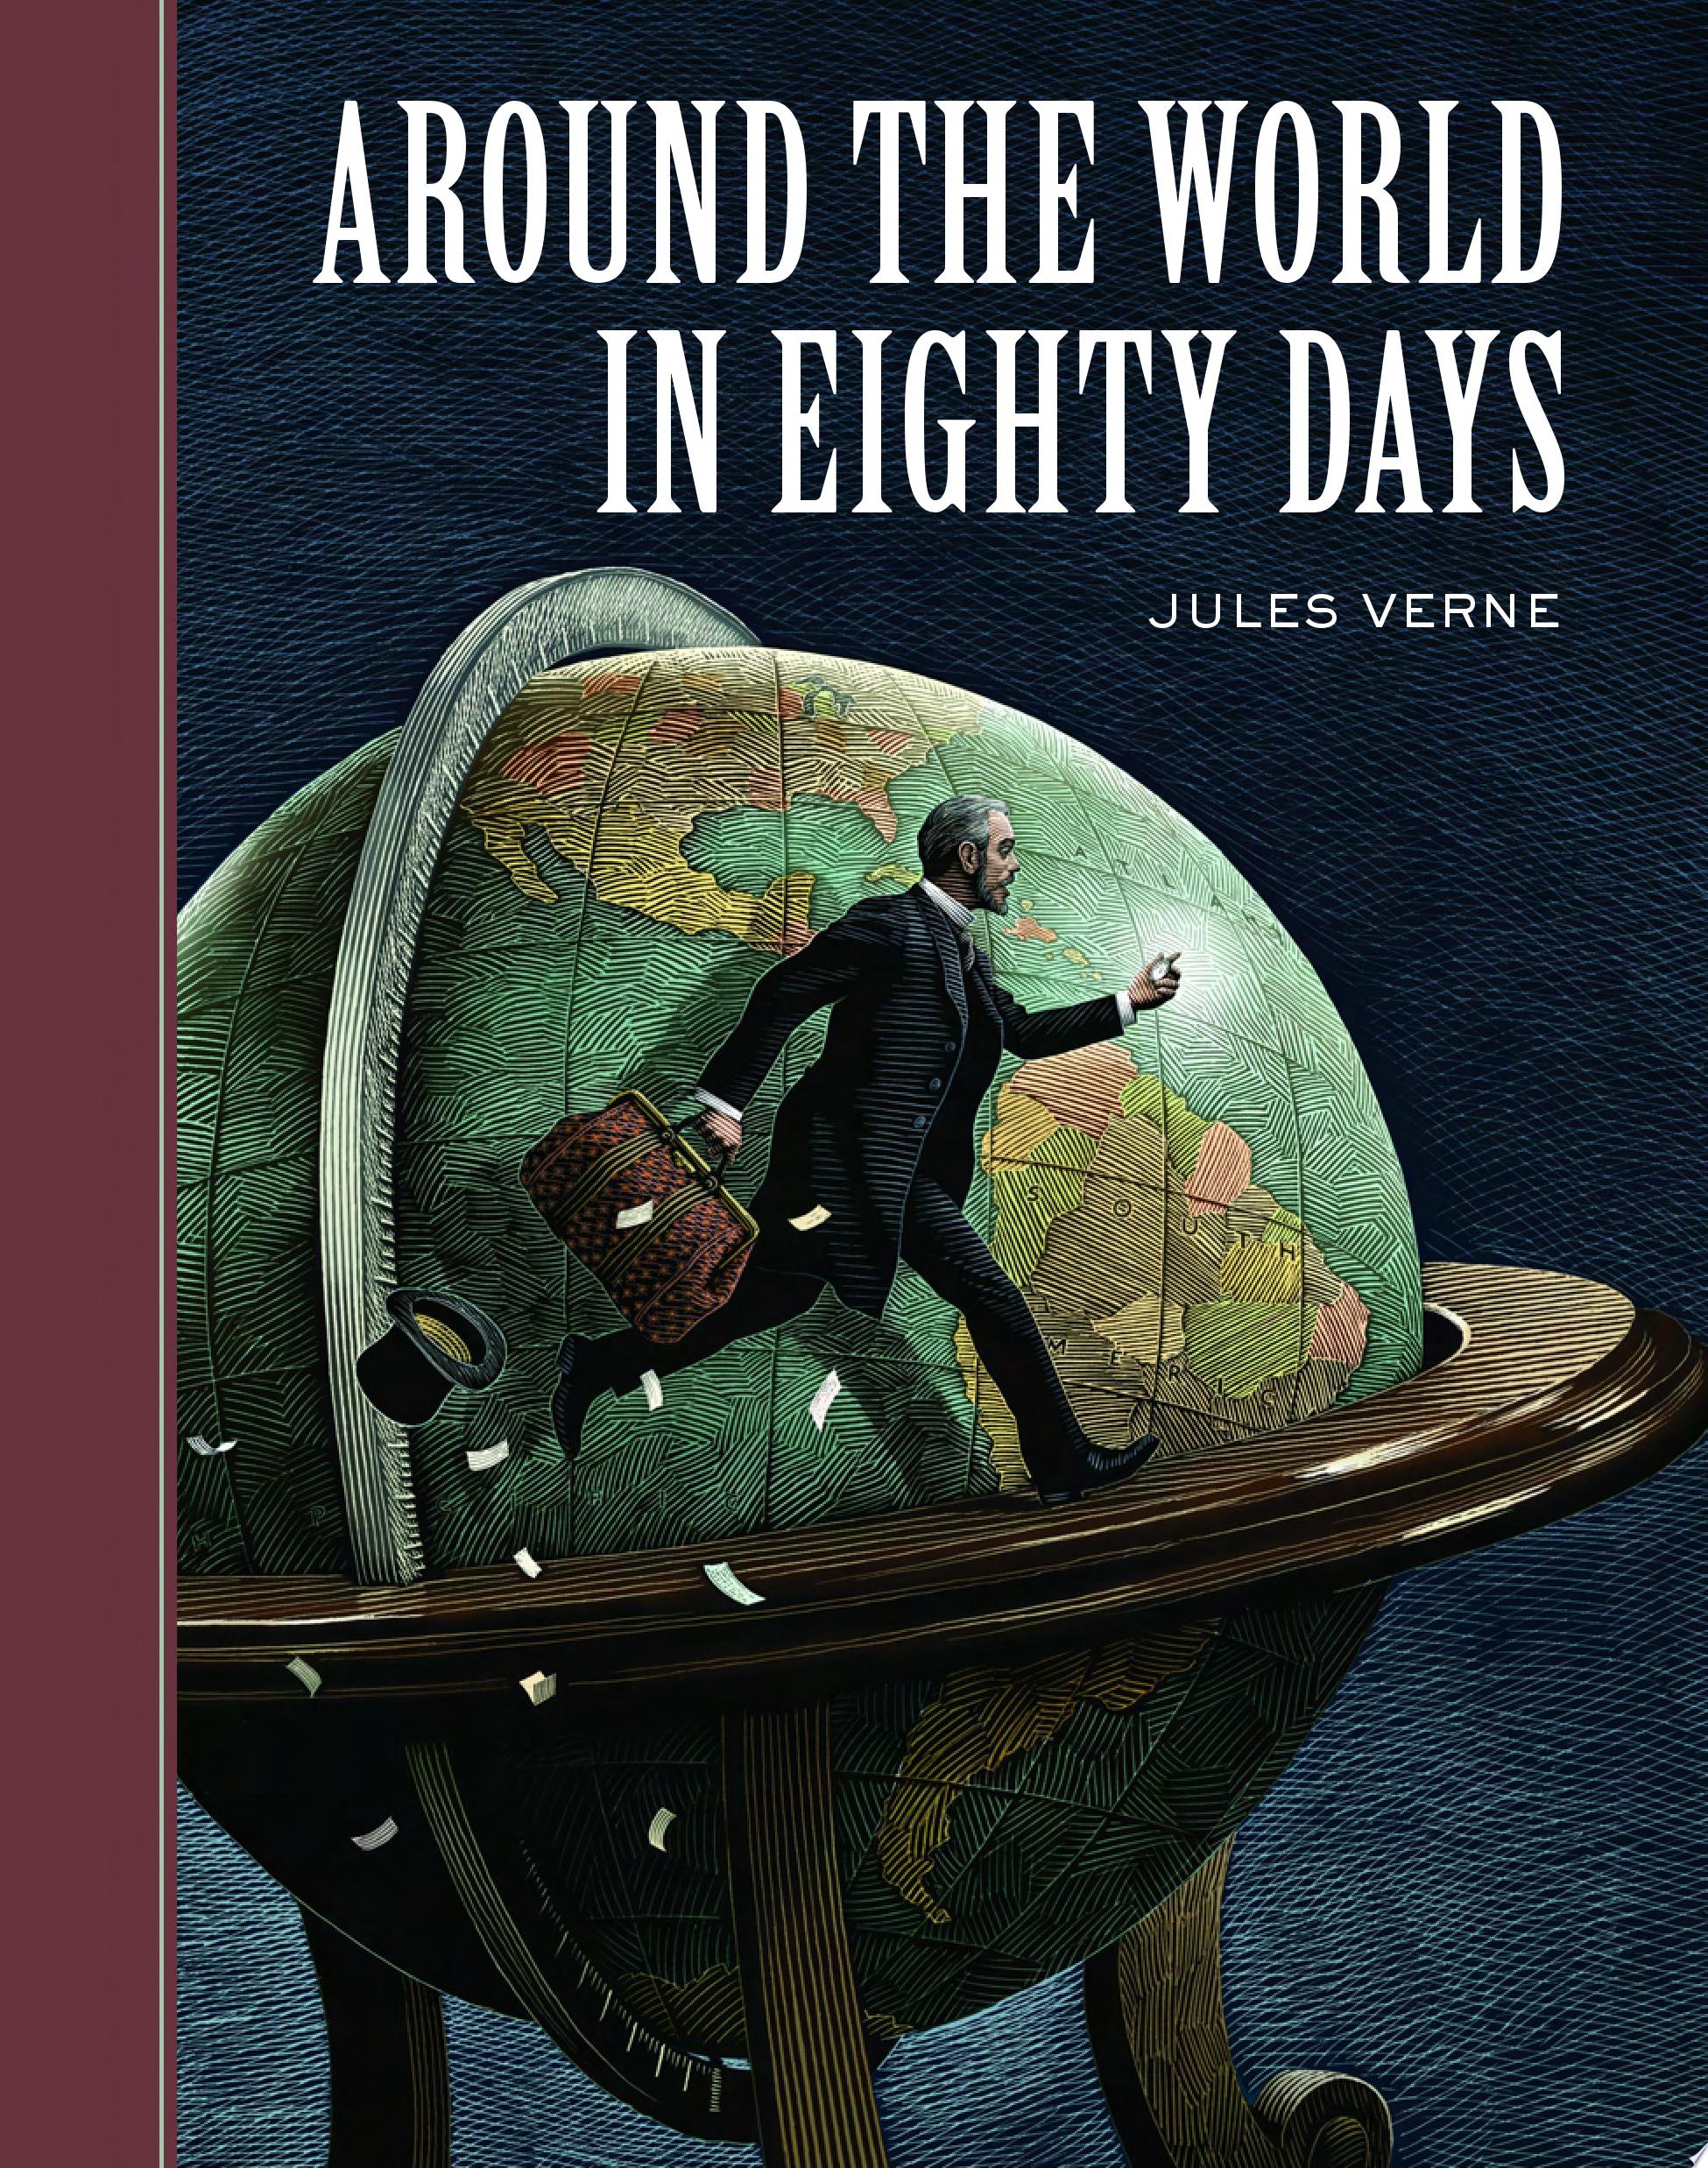 Image for "Around the World in Eighty Days"